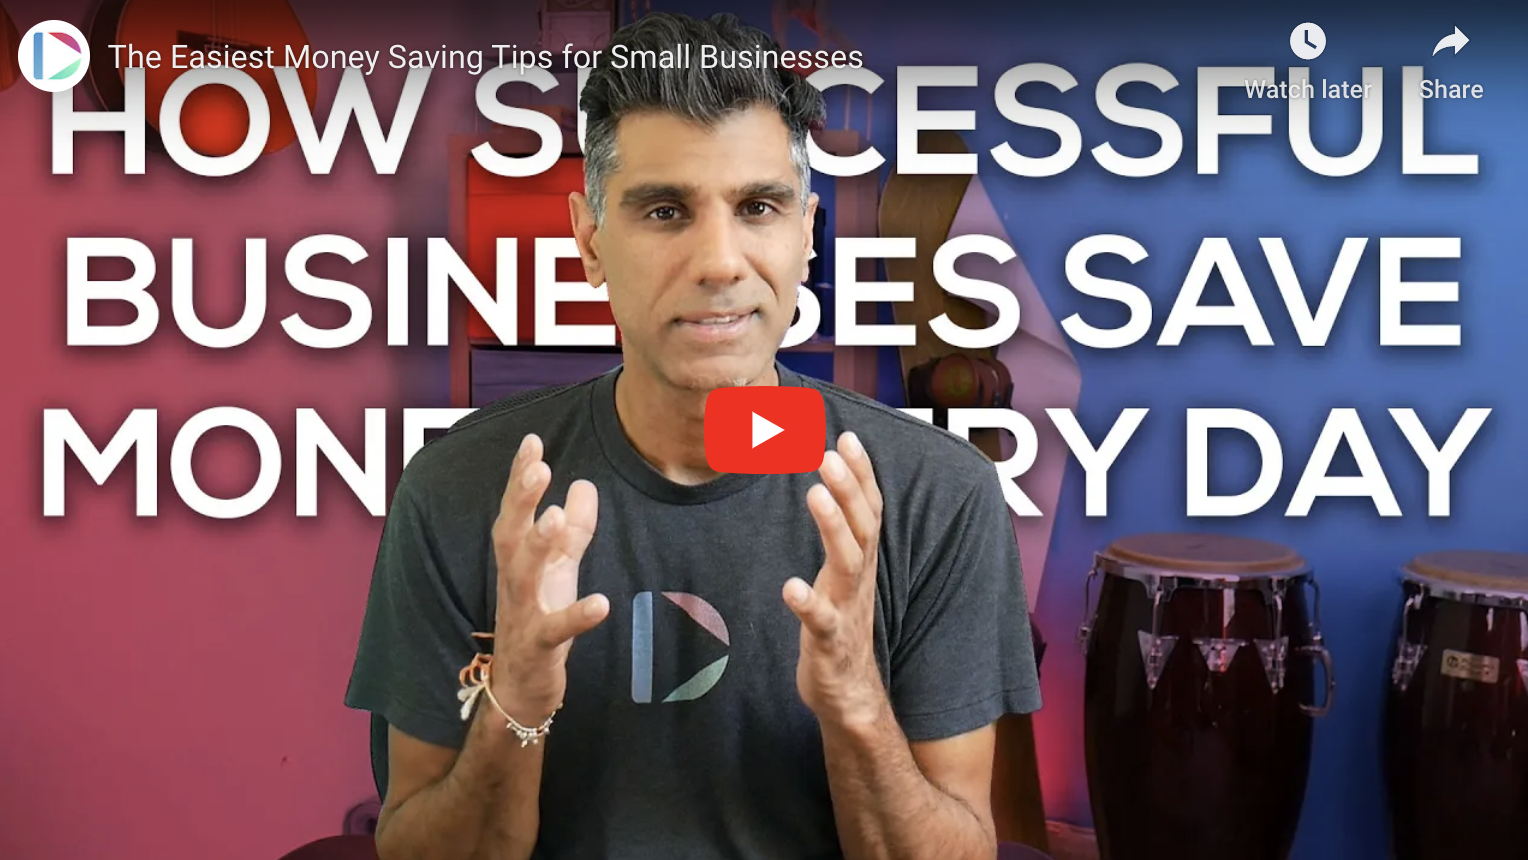 Money saving tips for small businesses